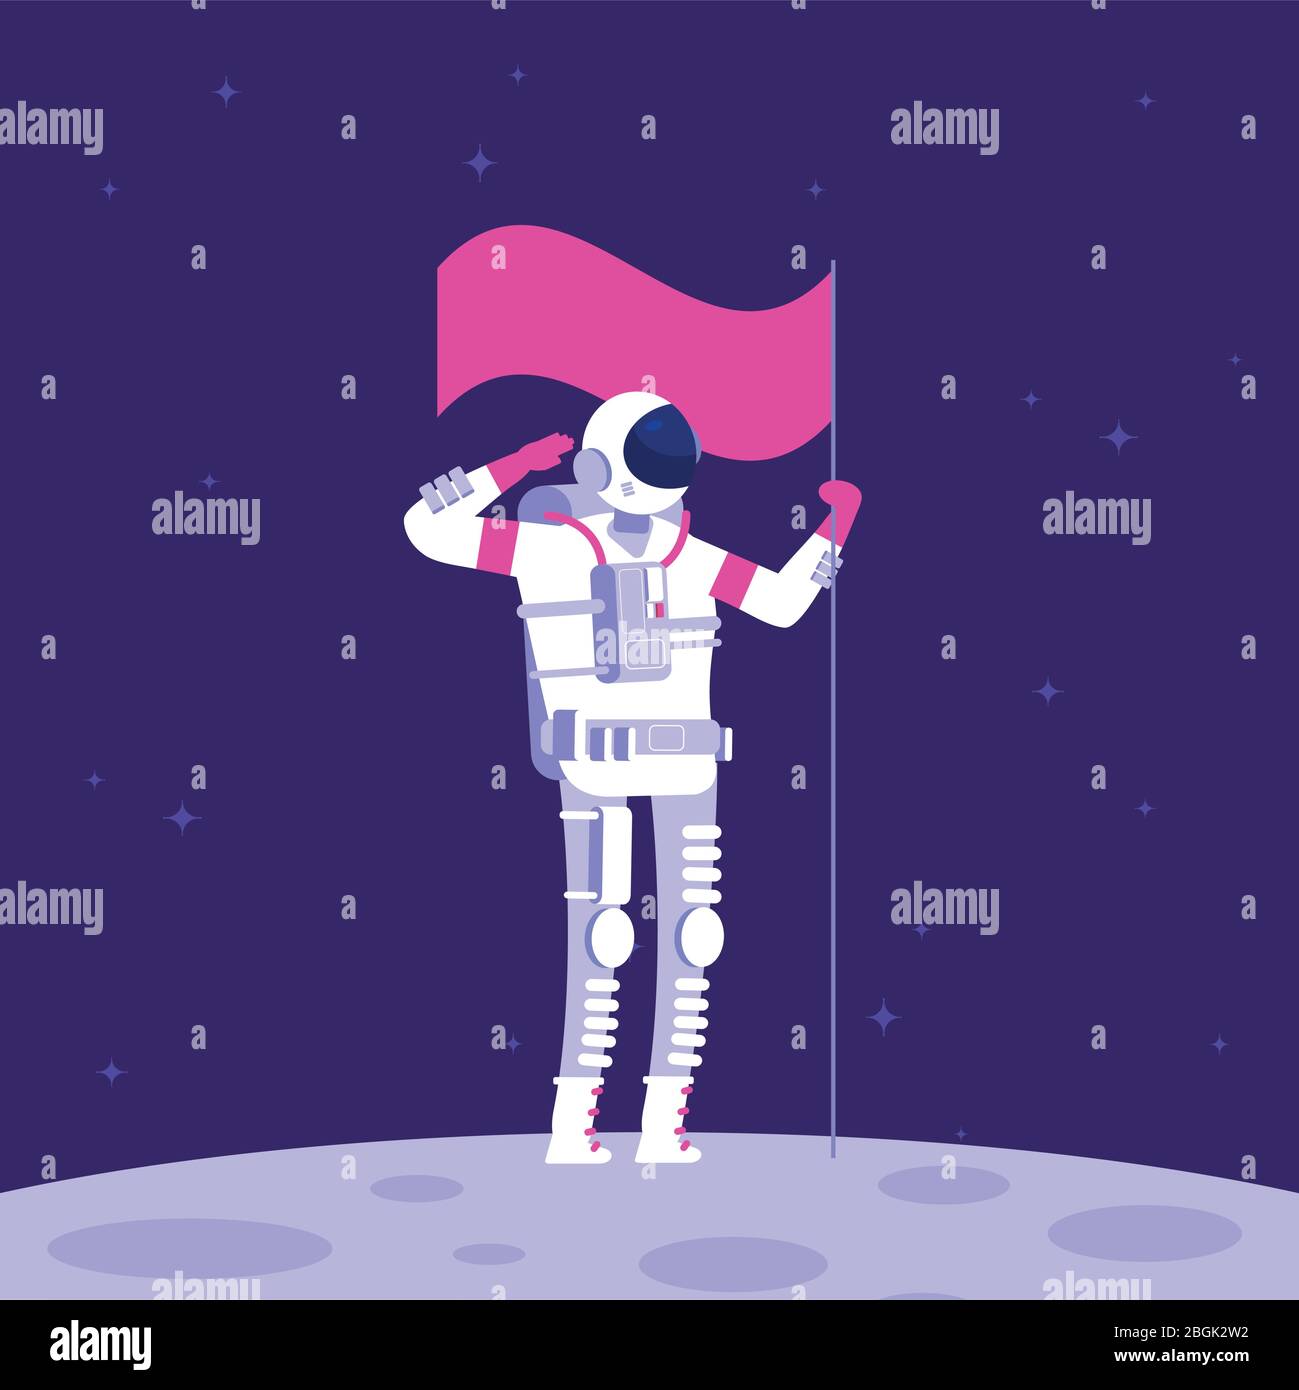 Astronaut on moon. Cosmonaut holging flag on lifeless planet in outer space. Astronautics vector background. Illustration of astronaut on new planet in galaxy Stock Vector